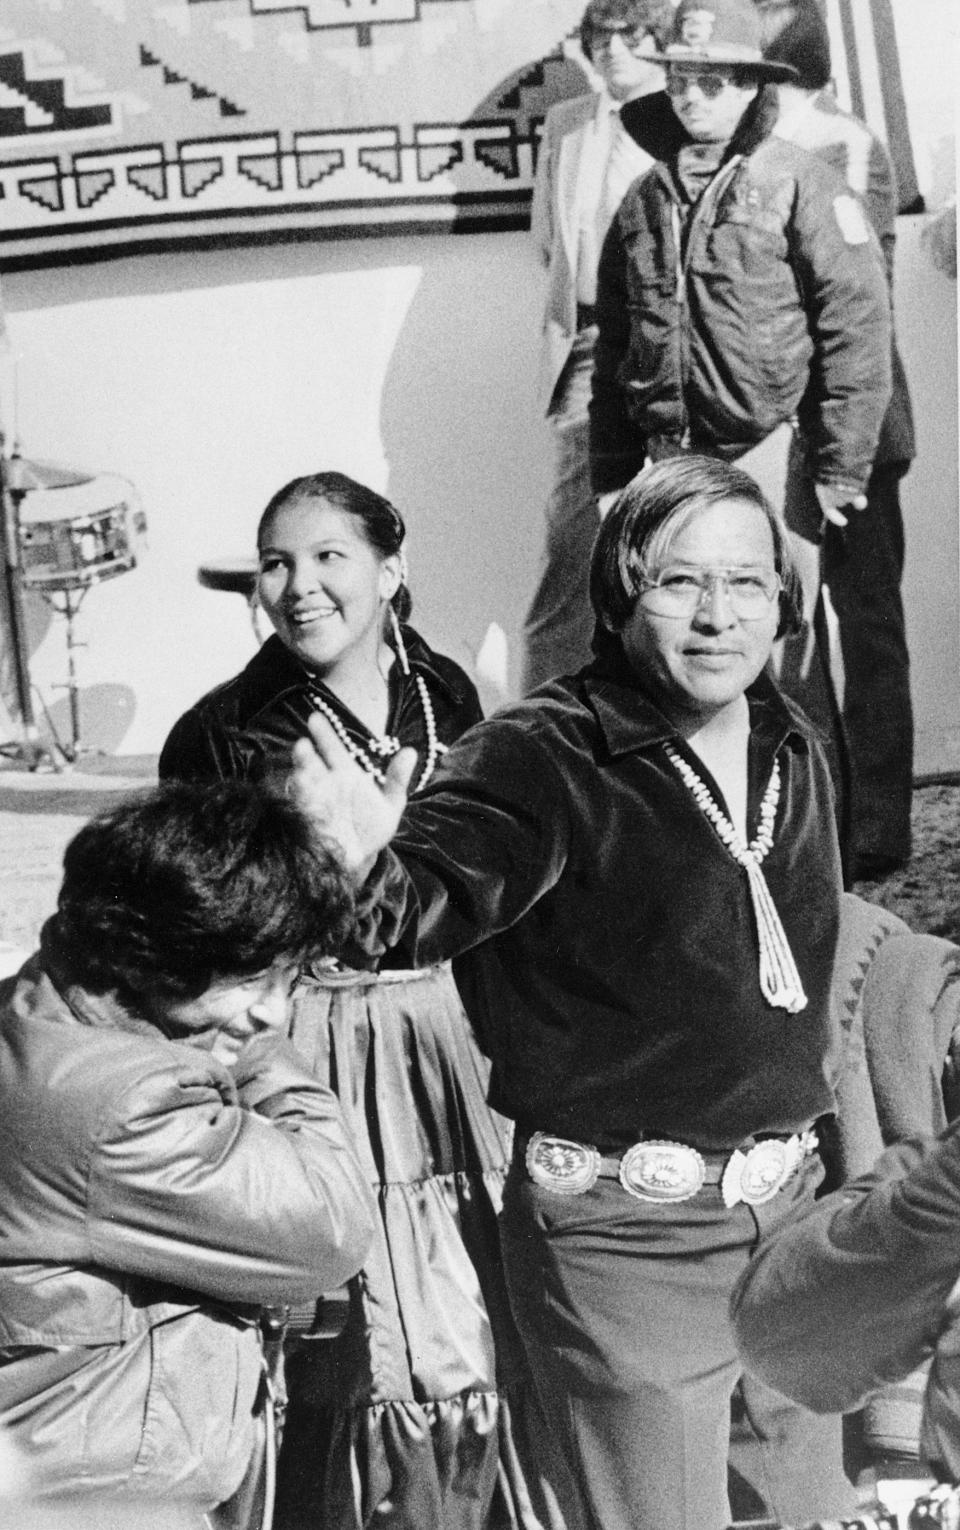 FILE - Peterson Zah waves to supporters as he arrives at the Navajo Nation tribal fairgrounds in Window Rock, Az. on Jan. 11, 1983. Zah, a monumental Navajo Nation leader who guided the tribe through a politically tumultuous era and worked tirelessly to correct wrongdoings against Native Americans, has died. He died late Tuesday, March 7, 2023, at a hospital in Fort Defiance, Arizona, after a lengthy illness, Navajo President Buu Nygren's office said. He was 85. (AP Photo, File)